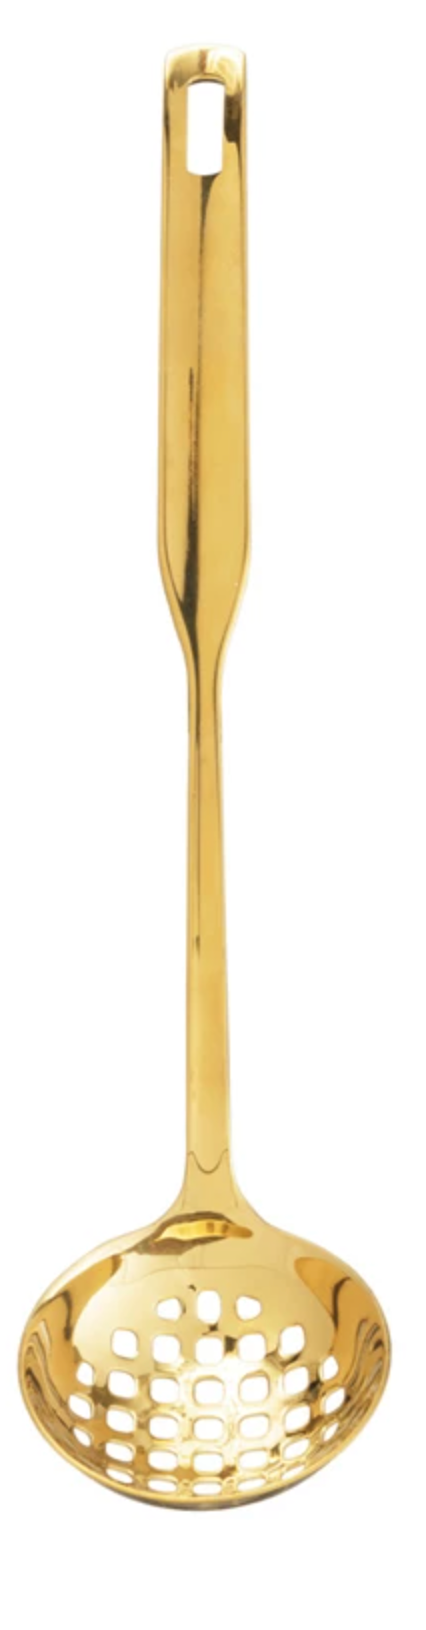 Stainless Steel Slotted Ladle, Gold Finish